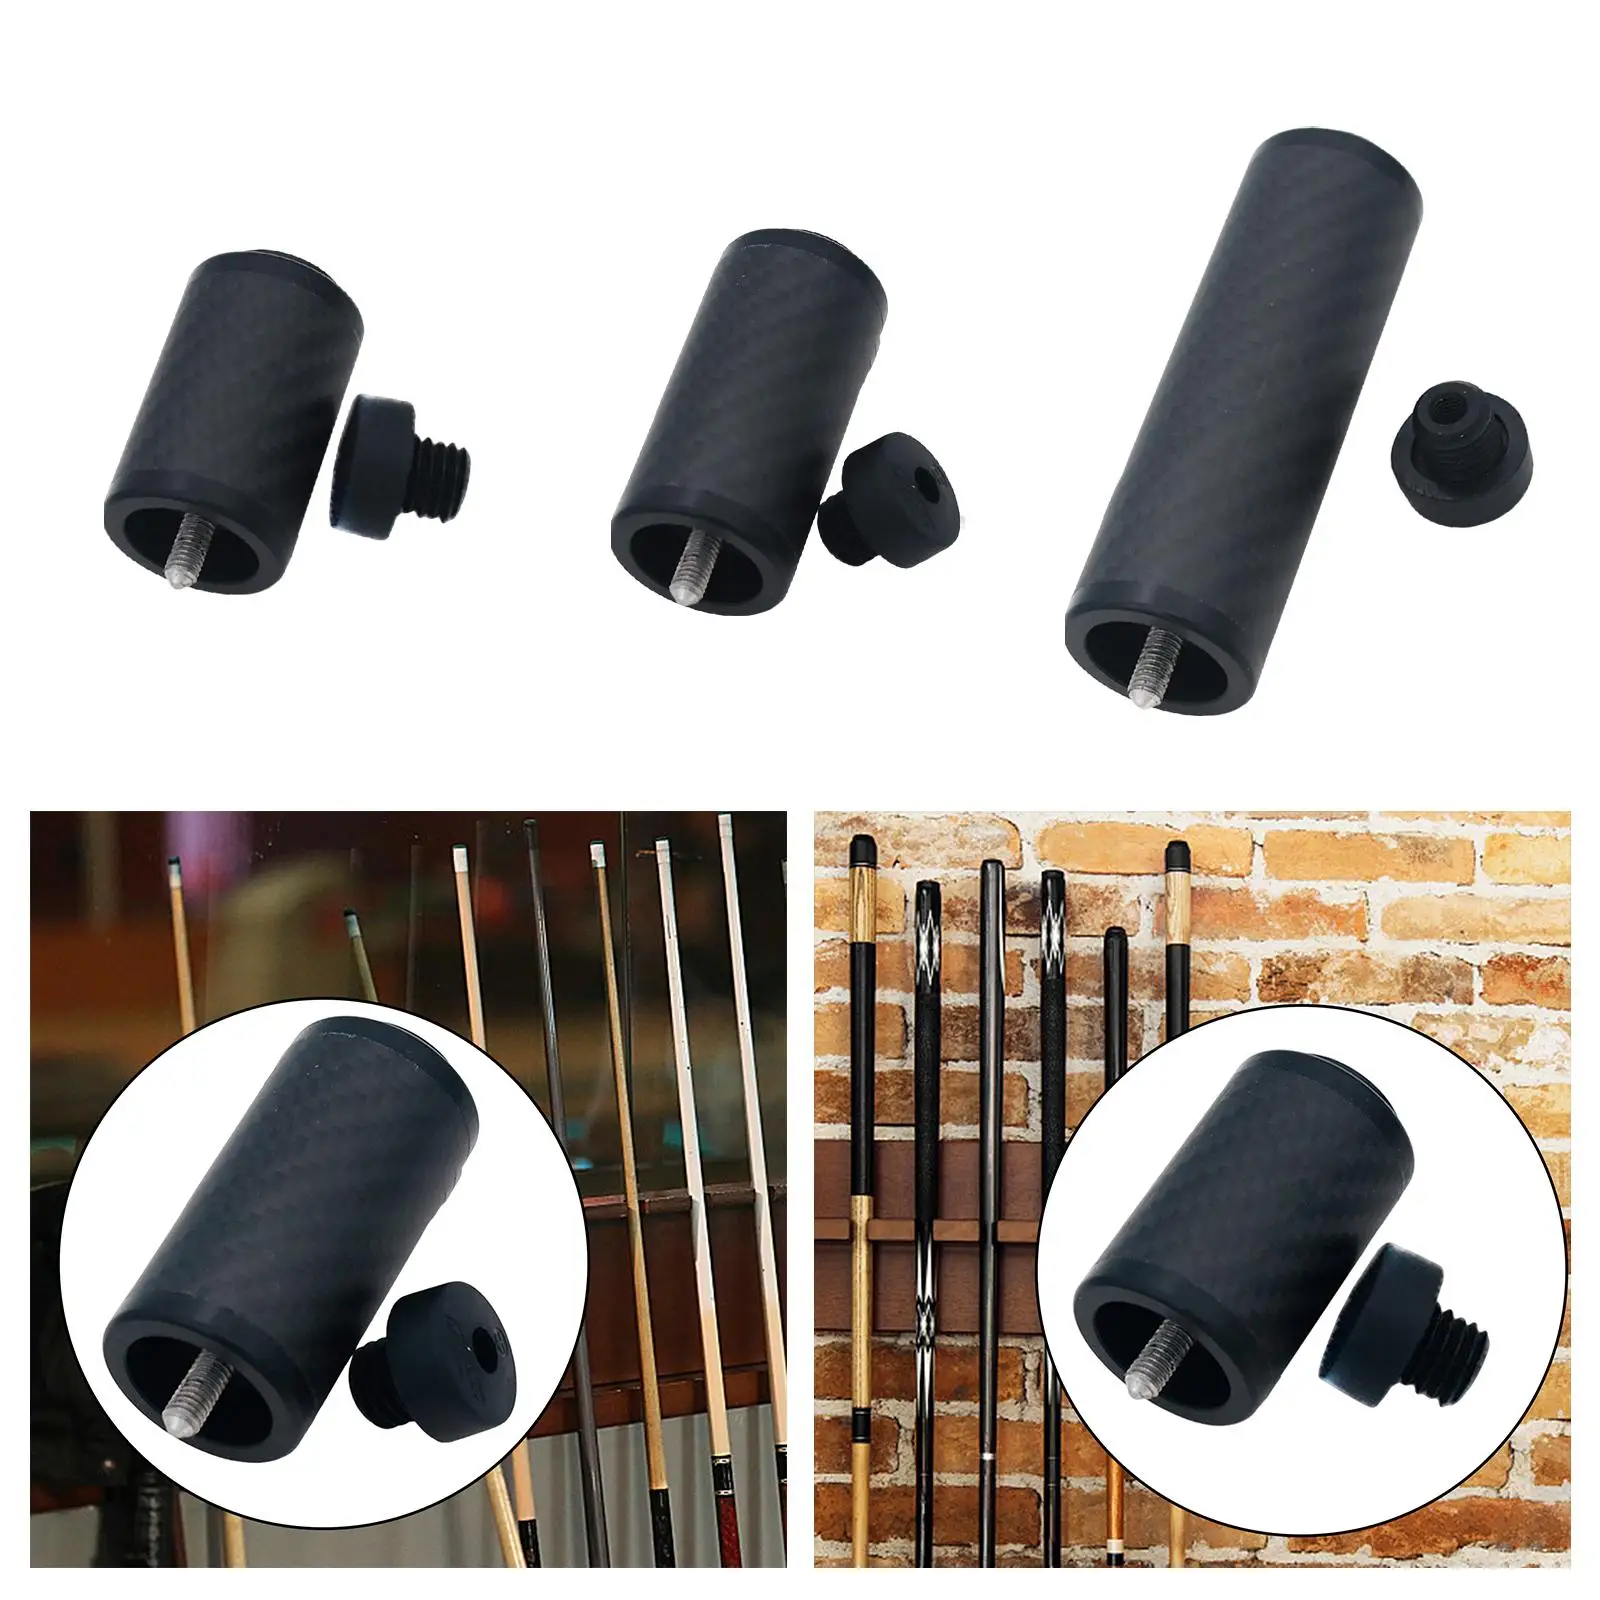 Billiards Pool Cue Extension Compact Cue Joint Accessories Snooker Pool Cue